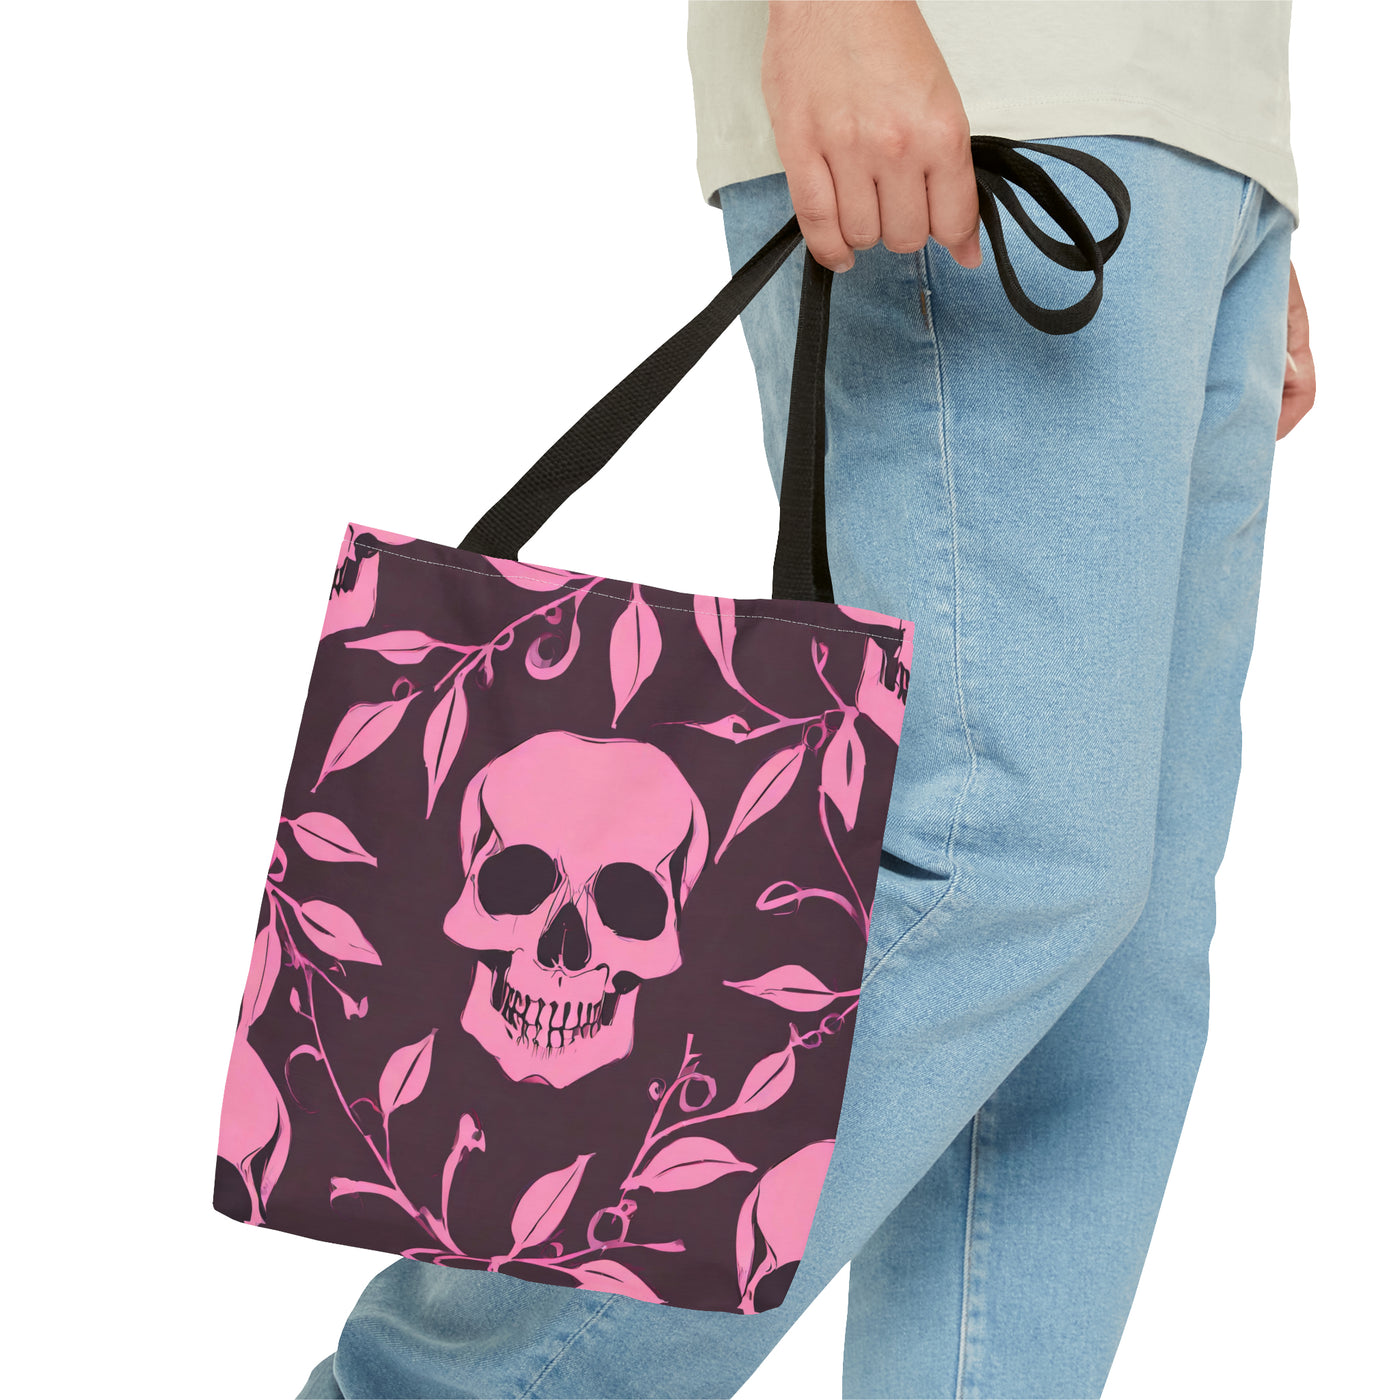 Skull and Vines Pink Tote Bag